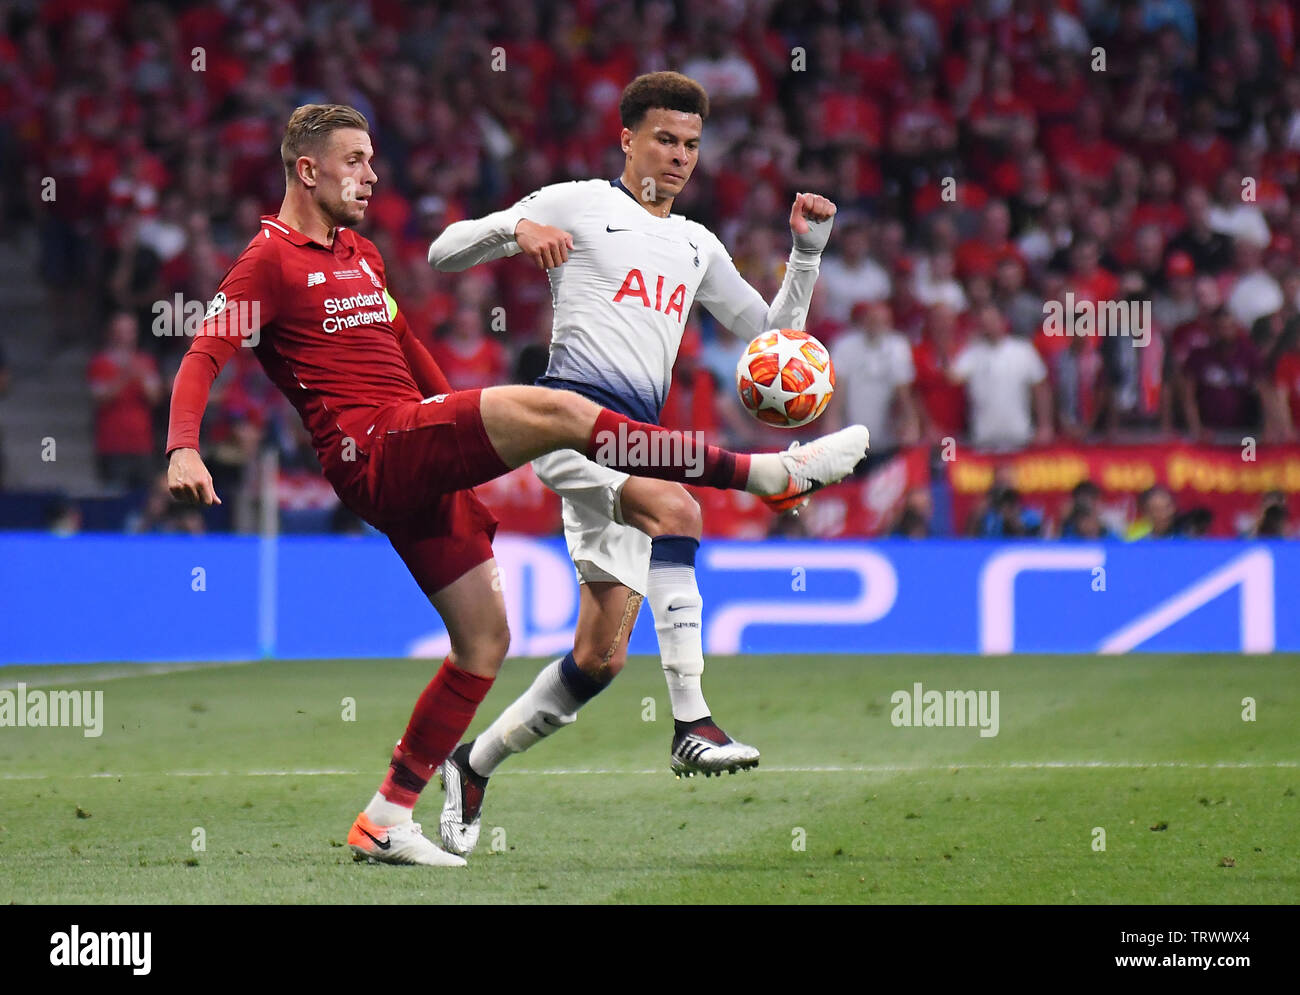 MADRID, SPAIN - JUNE 1, 2019: Jordan Henderson of Liverpool (L) and Dele Alli of Tottenham pictured during the 2018/19 UEFA Champions League Final between Tottenham Hotspur (England) and Liverpool FC (England) at Wanda Metropolitano. Stock Photo